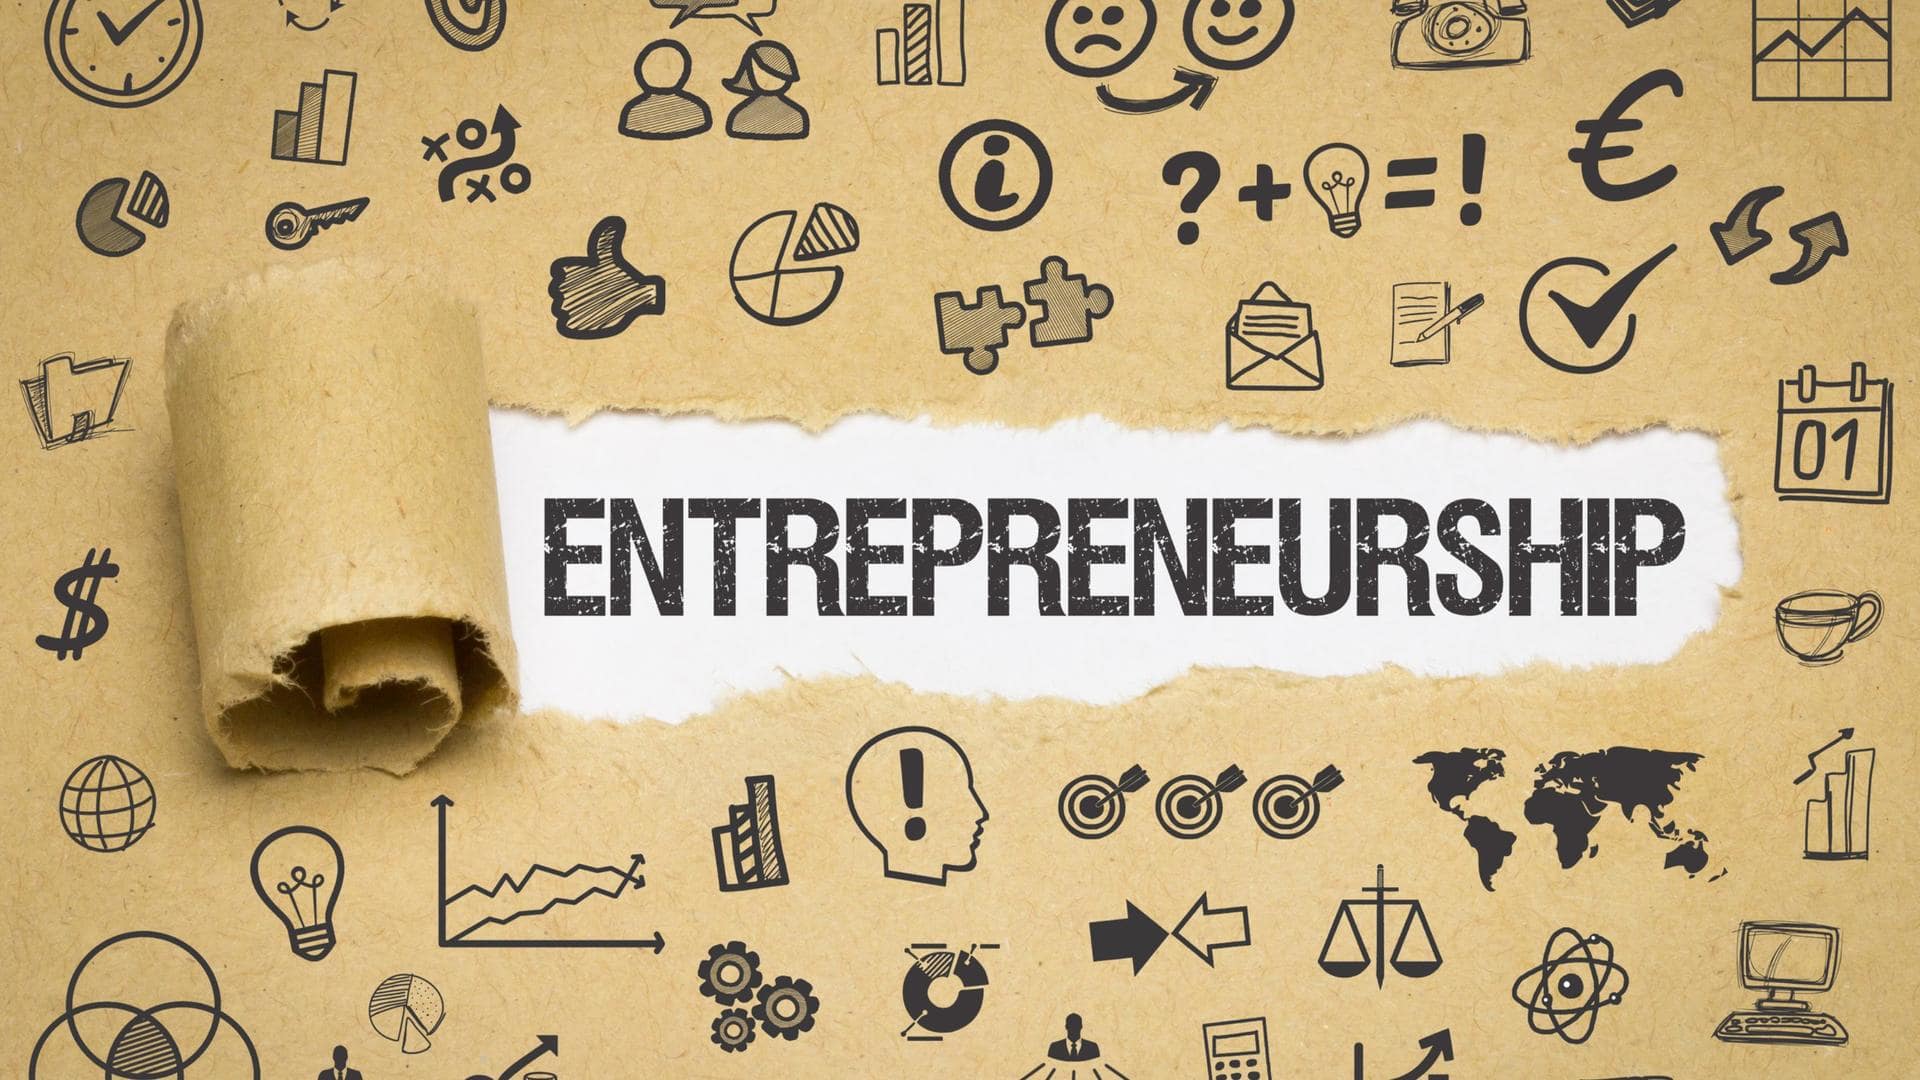 Myths about entrepreneurship that you should stop believing right away